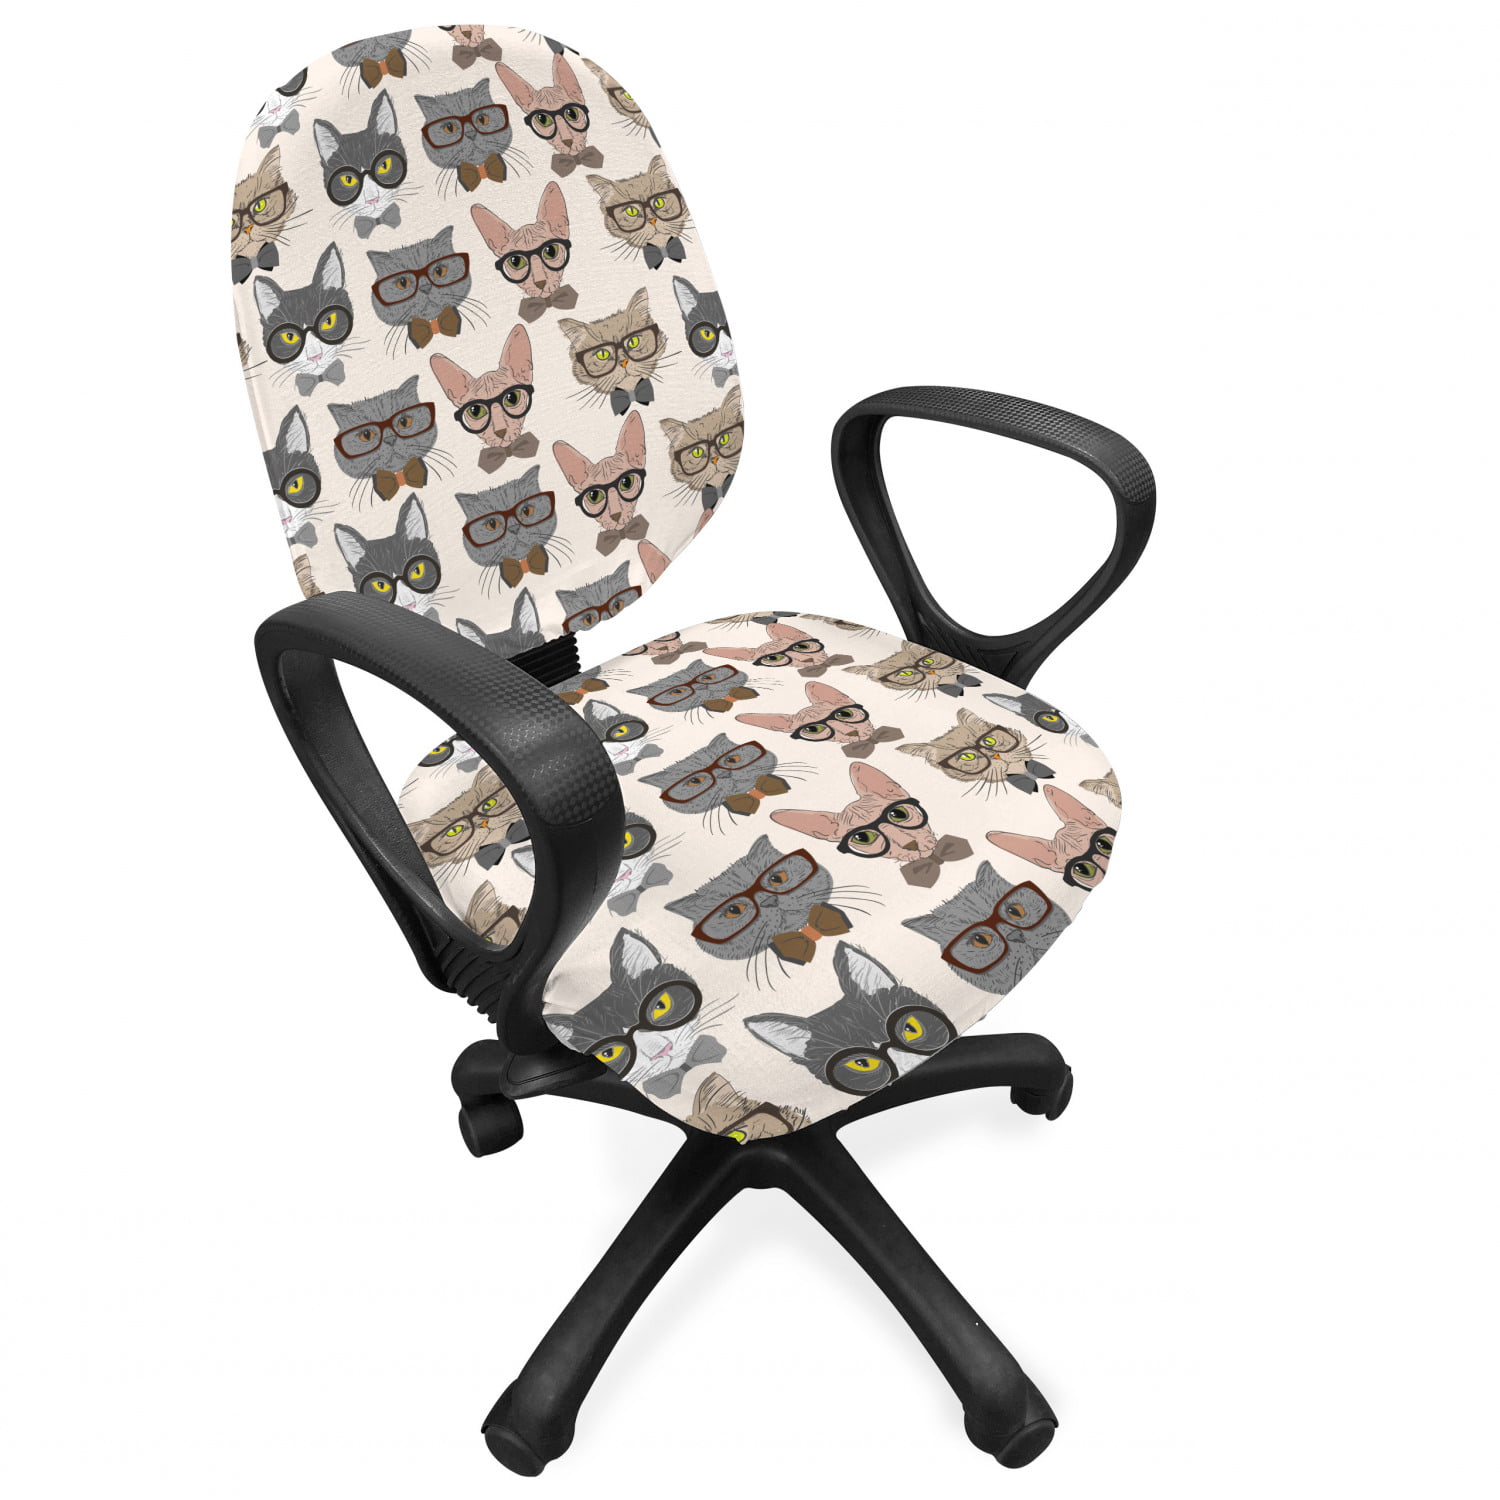 Hipster Nerd Characters with Vintage Sunglasses Intelligent Feline Serious Expressions Grey Beige Ambesonne Cat Office Chair Slipcover Standard Size Protective Stretch Decorative Fabric Cover